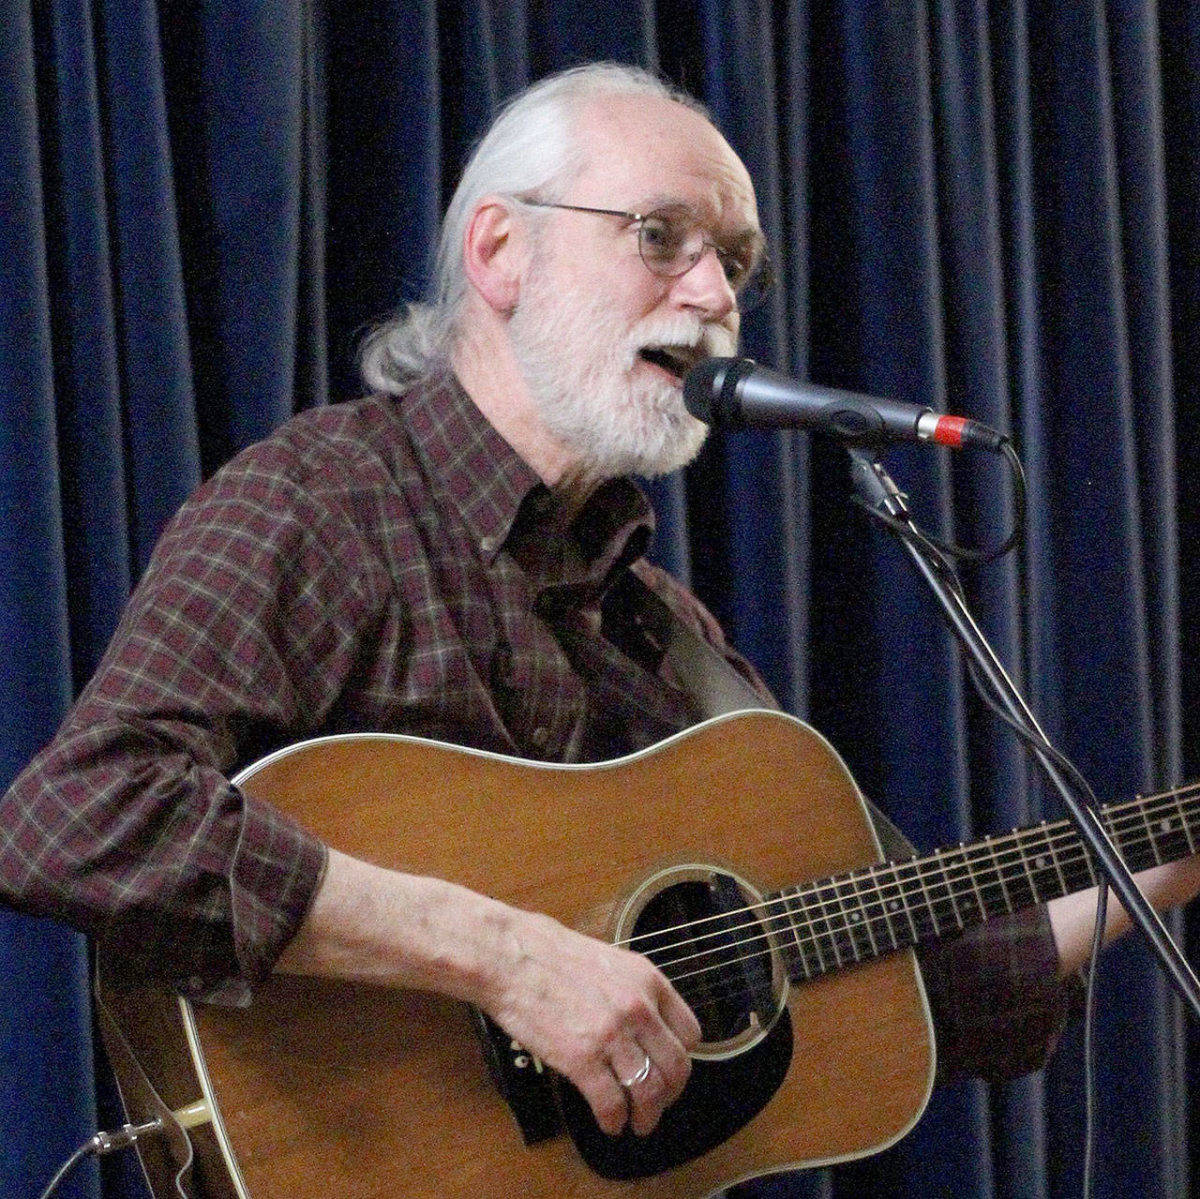 Volkert Volkersz, a singer-songwriter who attended Sky River Rock Festival in 1968, will perform Saturday at the 51st anniversary event. (Contributed photo)